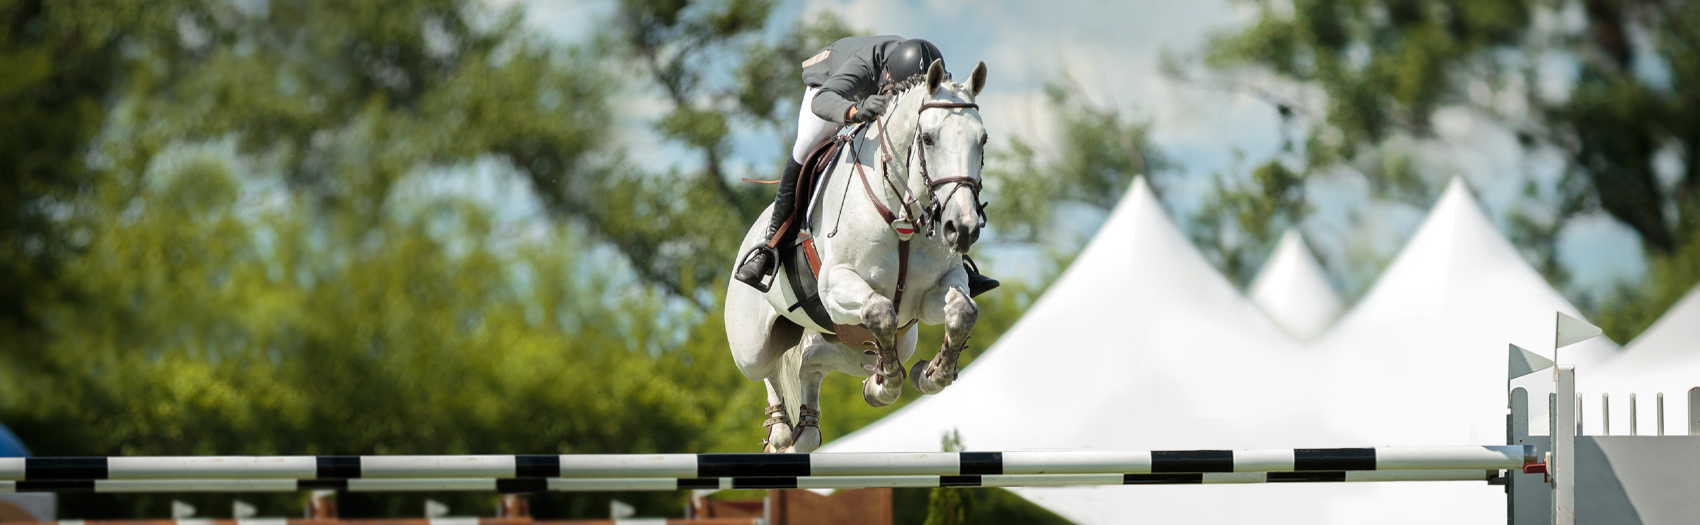 A rider jumps over an obstacle with their horse. This could represent overcoming riding anxiety with equine sports therapy in Powhata, VA. Learn more about equine sports therapy in Richmond, VA or equestrian therapy in Powhatan, VA by contacting an equine sports therapist today. 